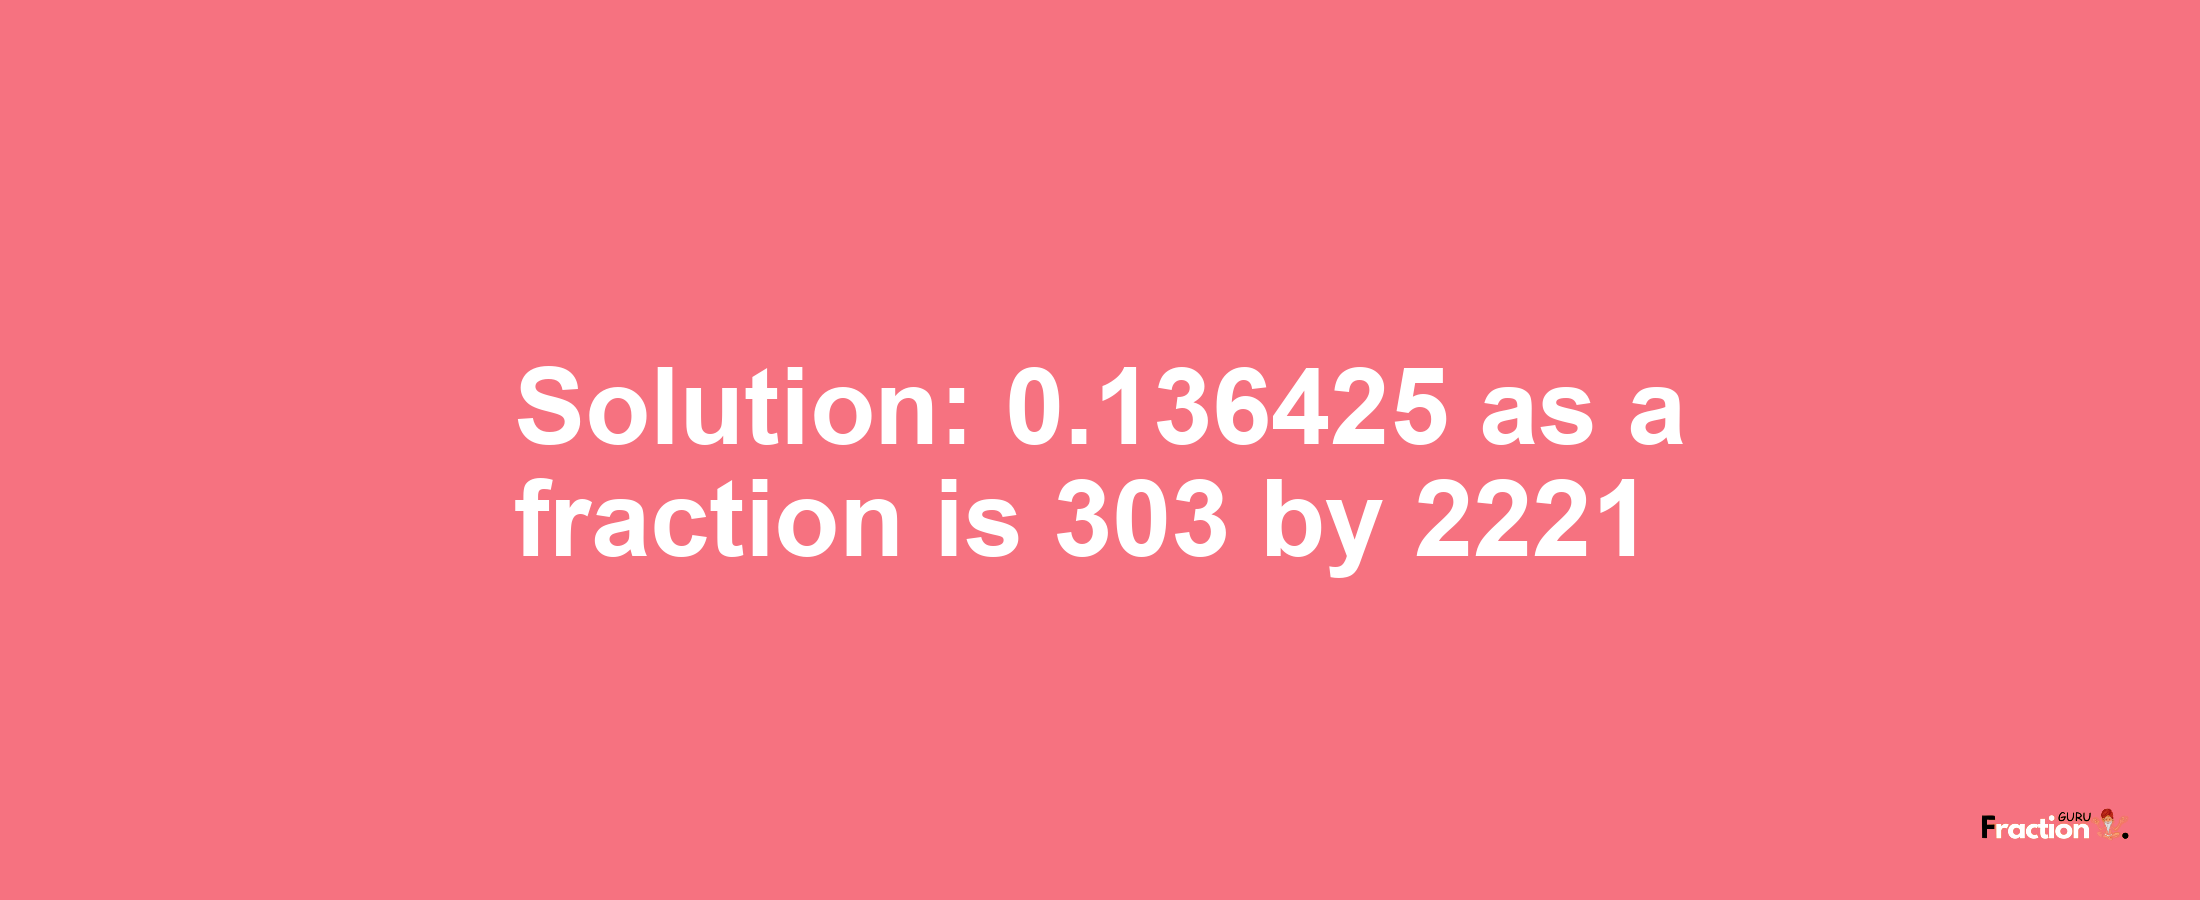 Solution:0.136425 as a fraction is 303/2221